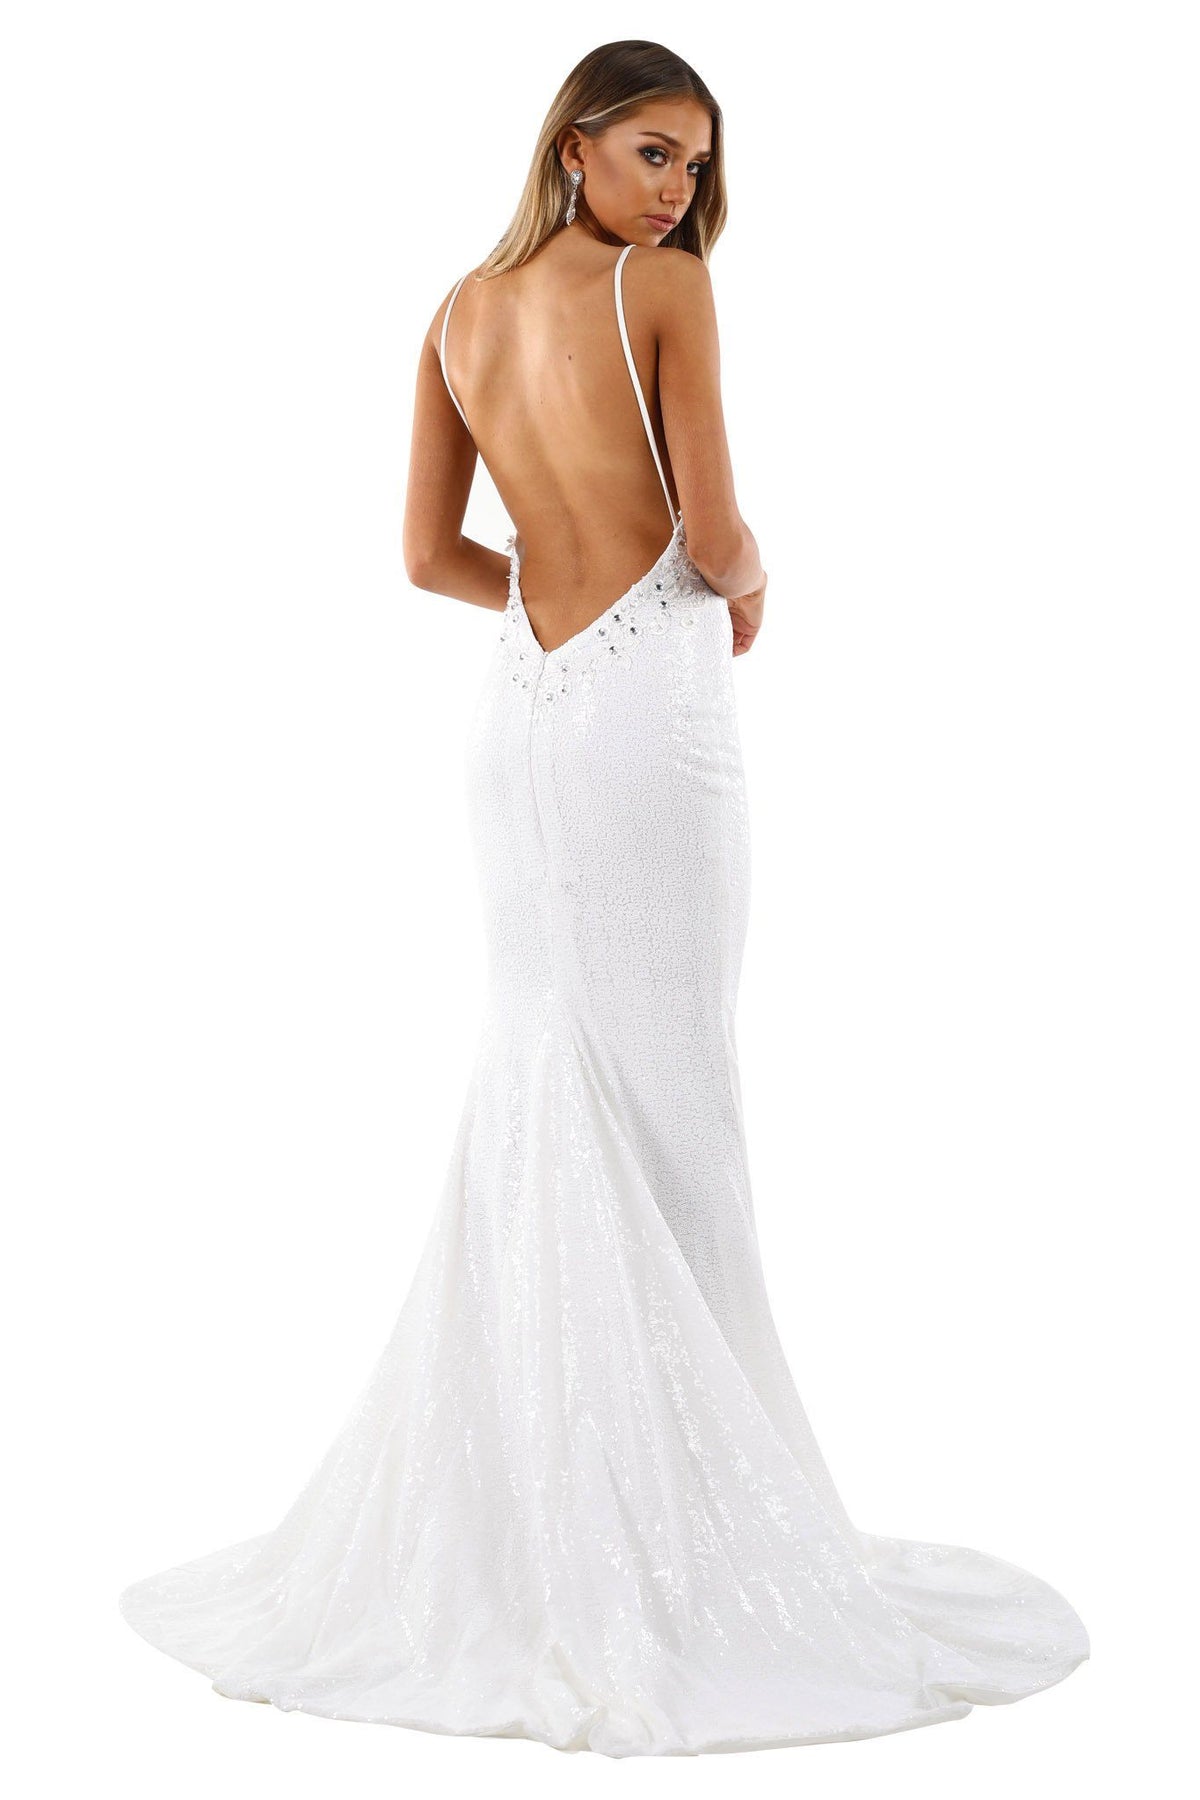 White Sequin Sleeveless Evening Gown features plunging neckline, thin shoulder straps, V backless design, fitted bodice to the knees then the skirt flares out in a mermaid style with a long train